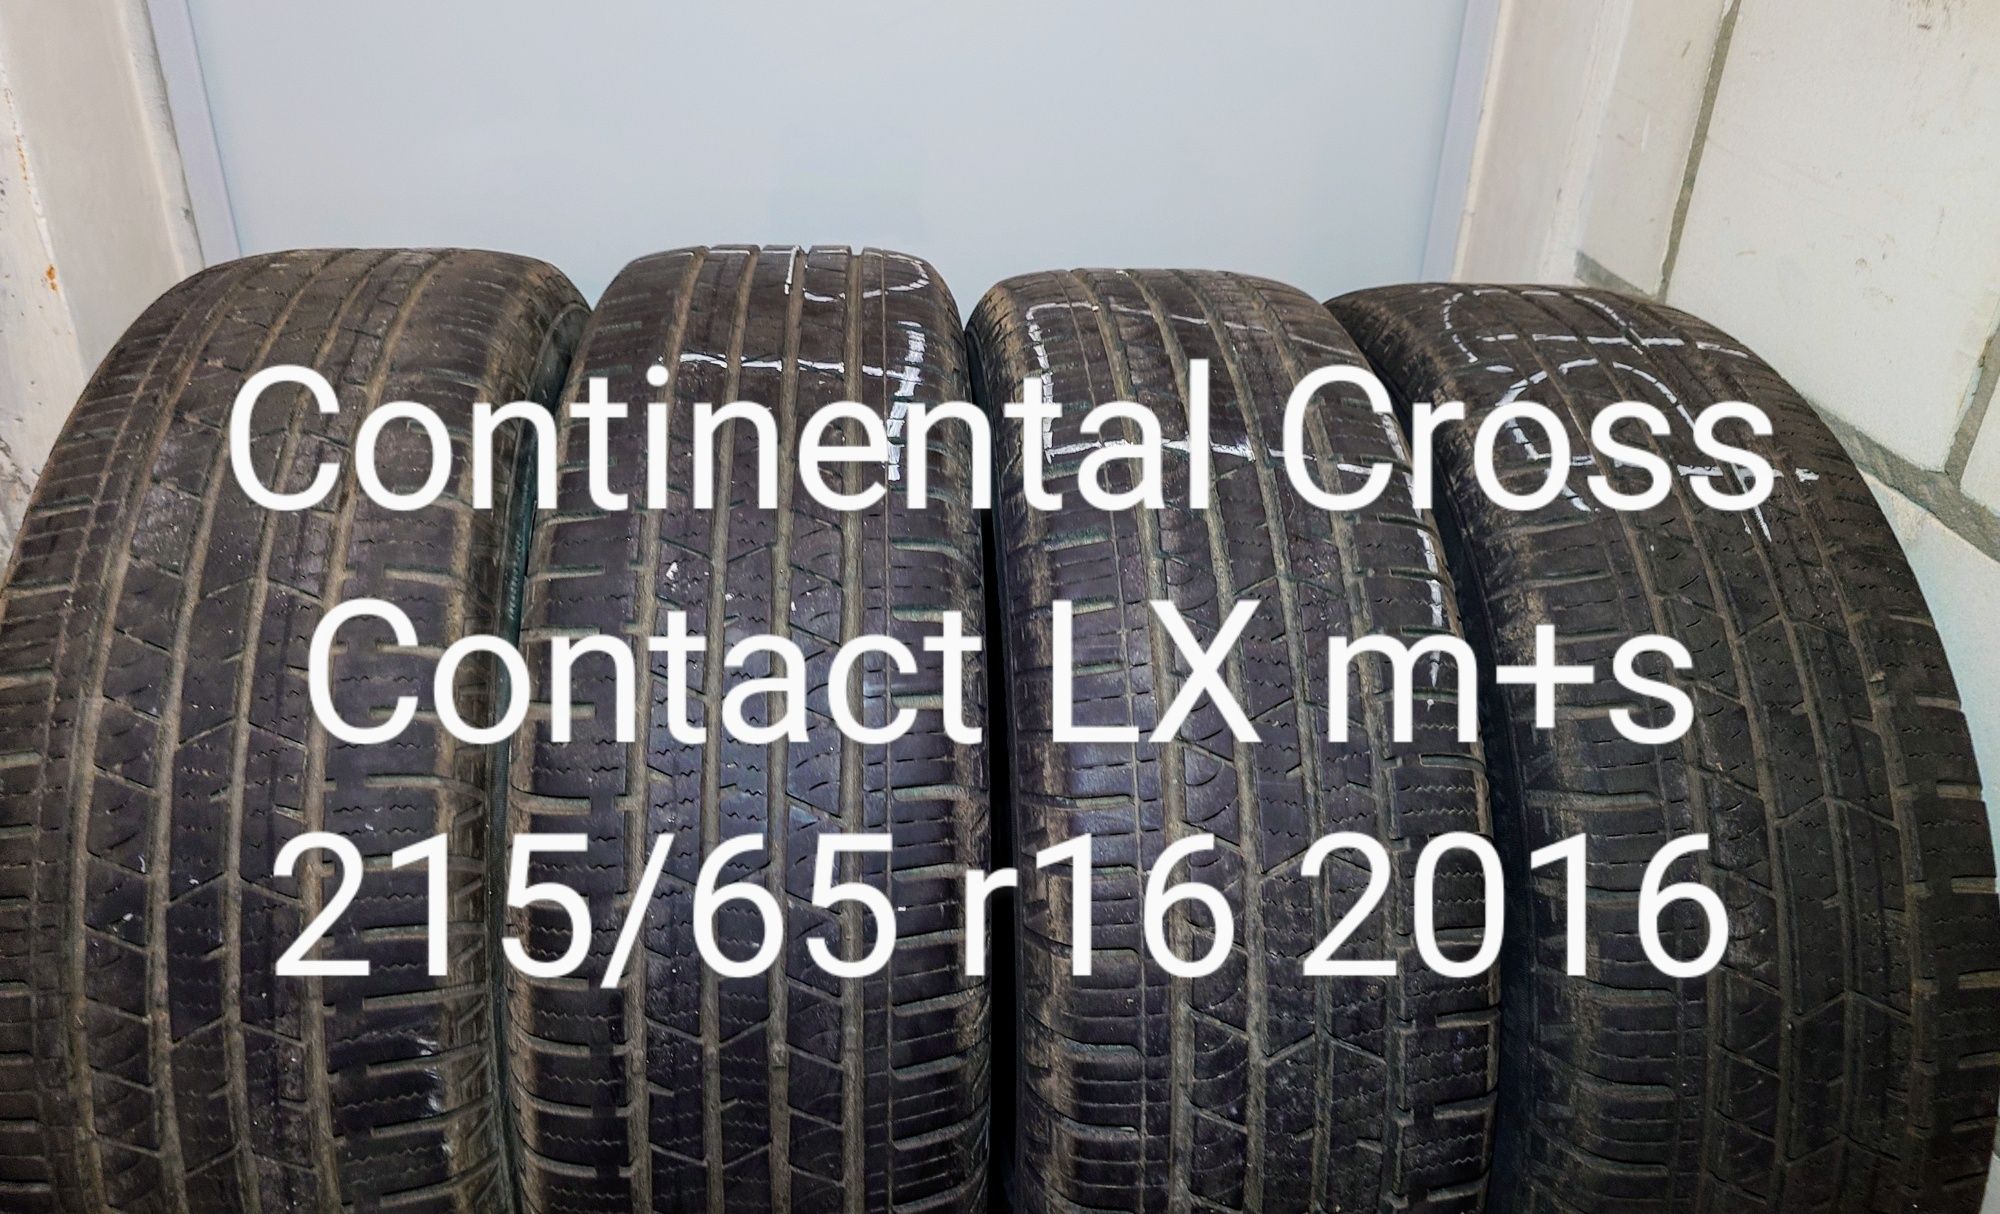 4x Continental cross contact lx m+s 215/65 r16 z 2016